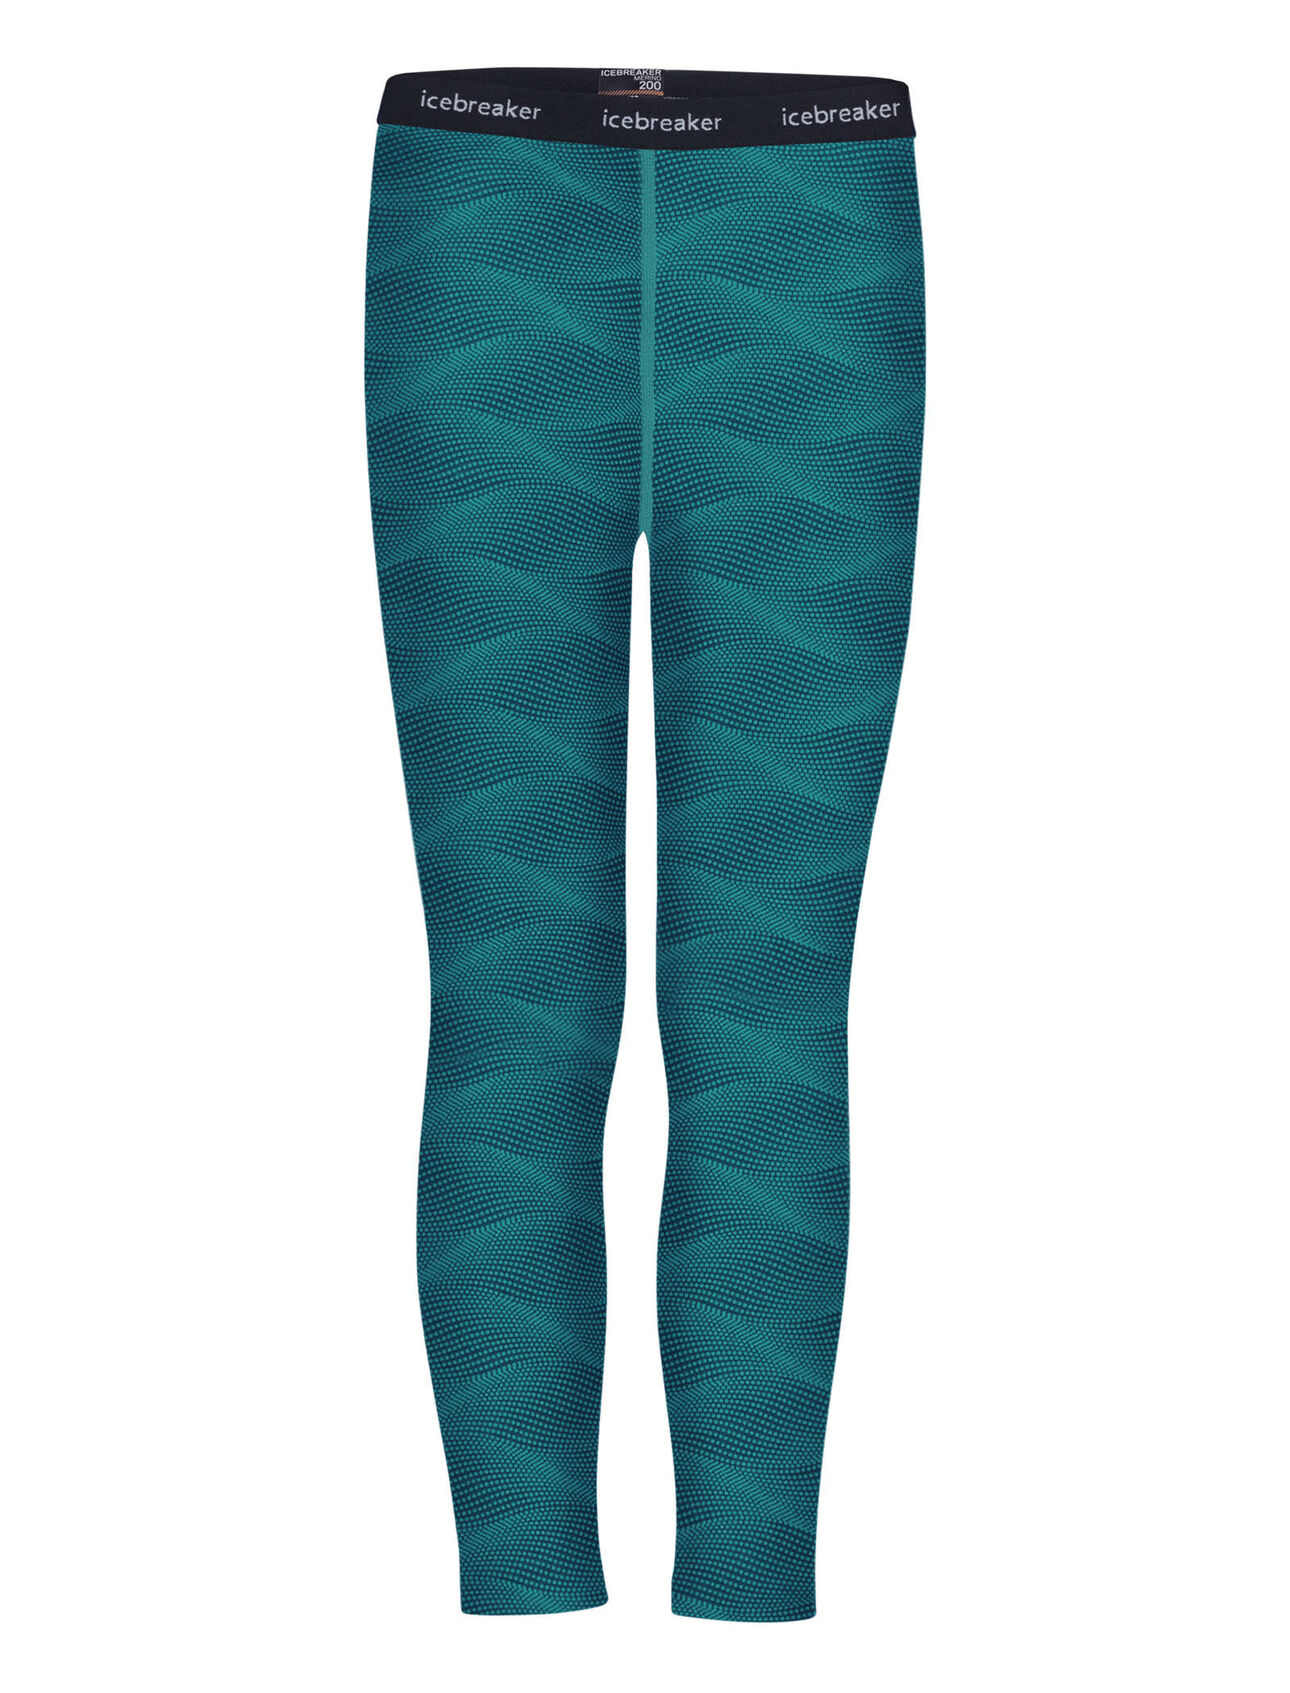 Mens 200 Oasis Leggings w Fly - The Benchmark Outdoor Outfitters